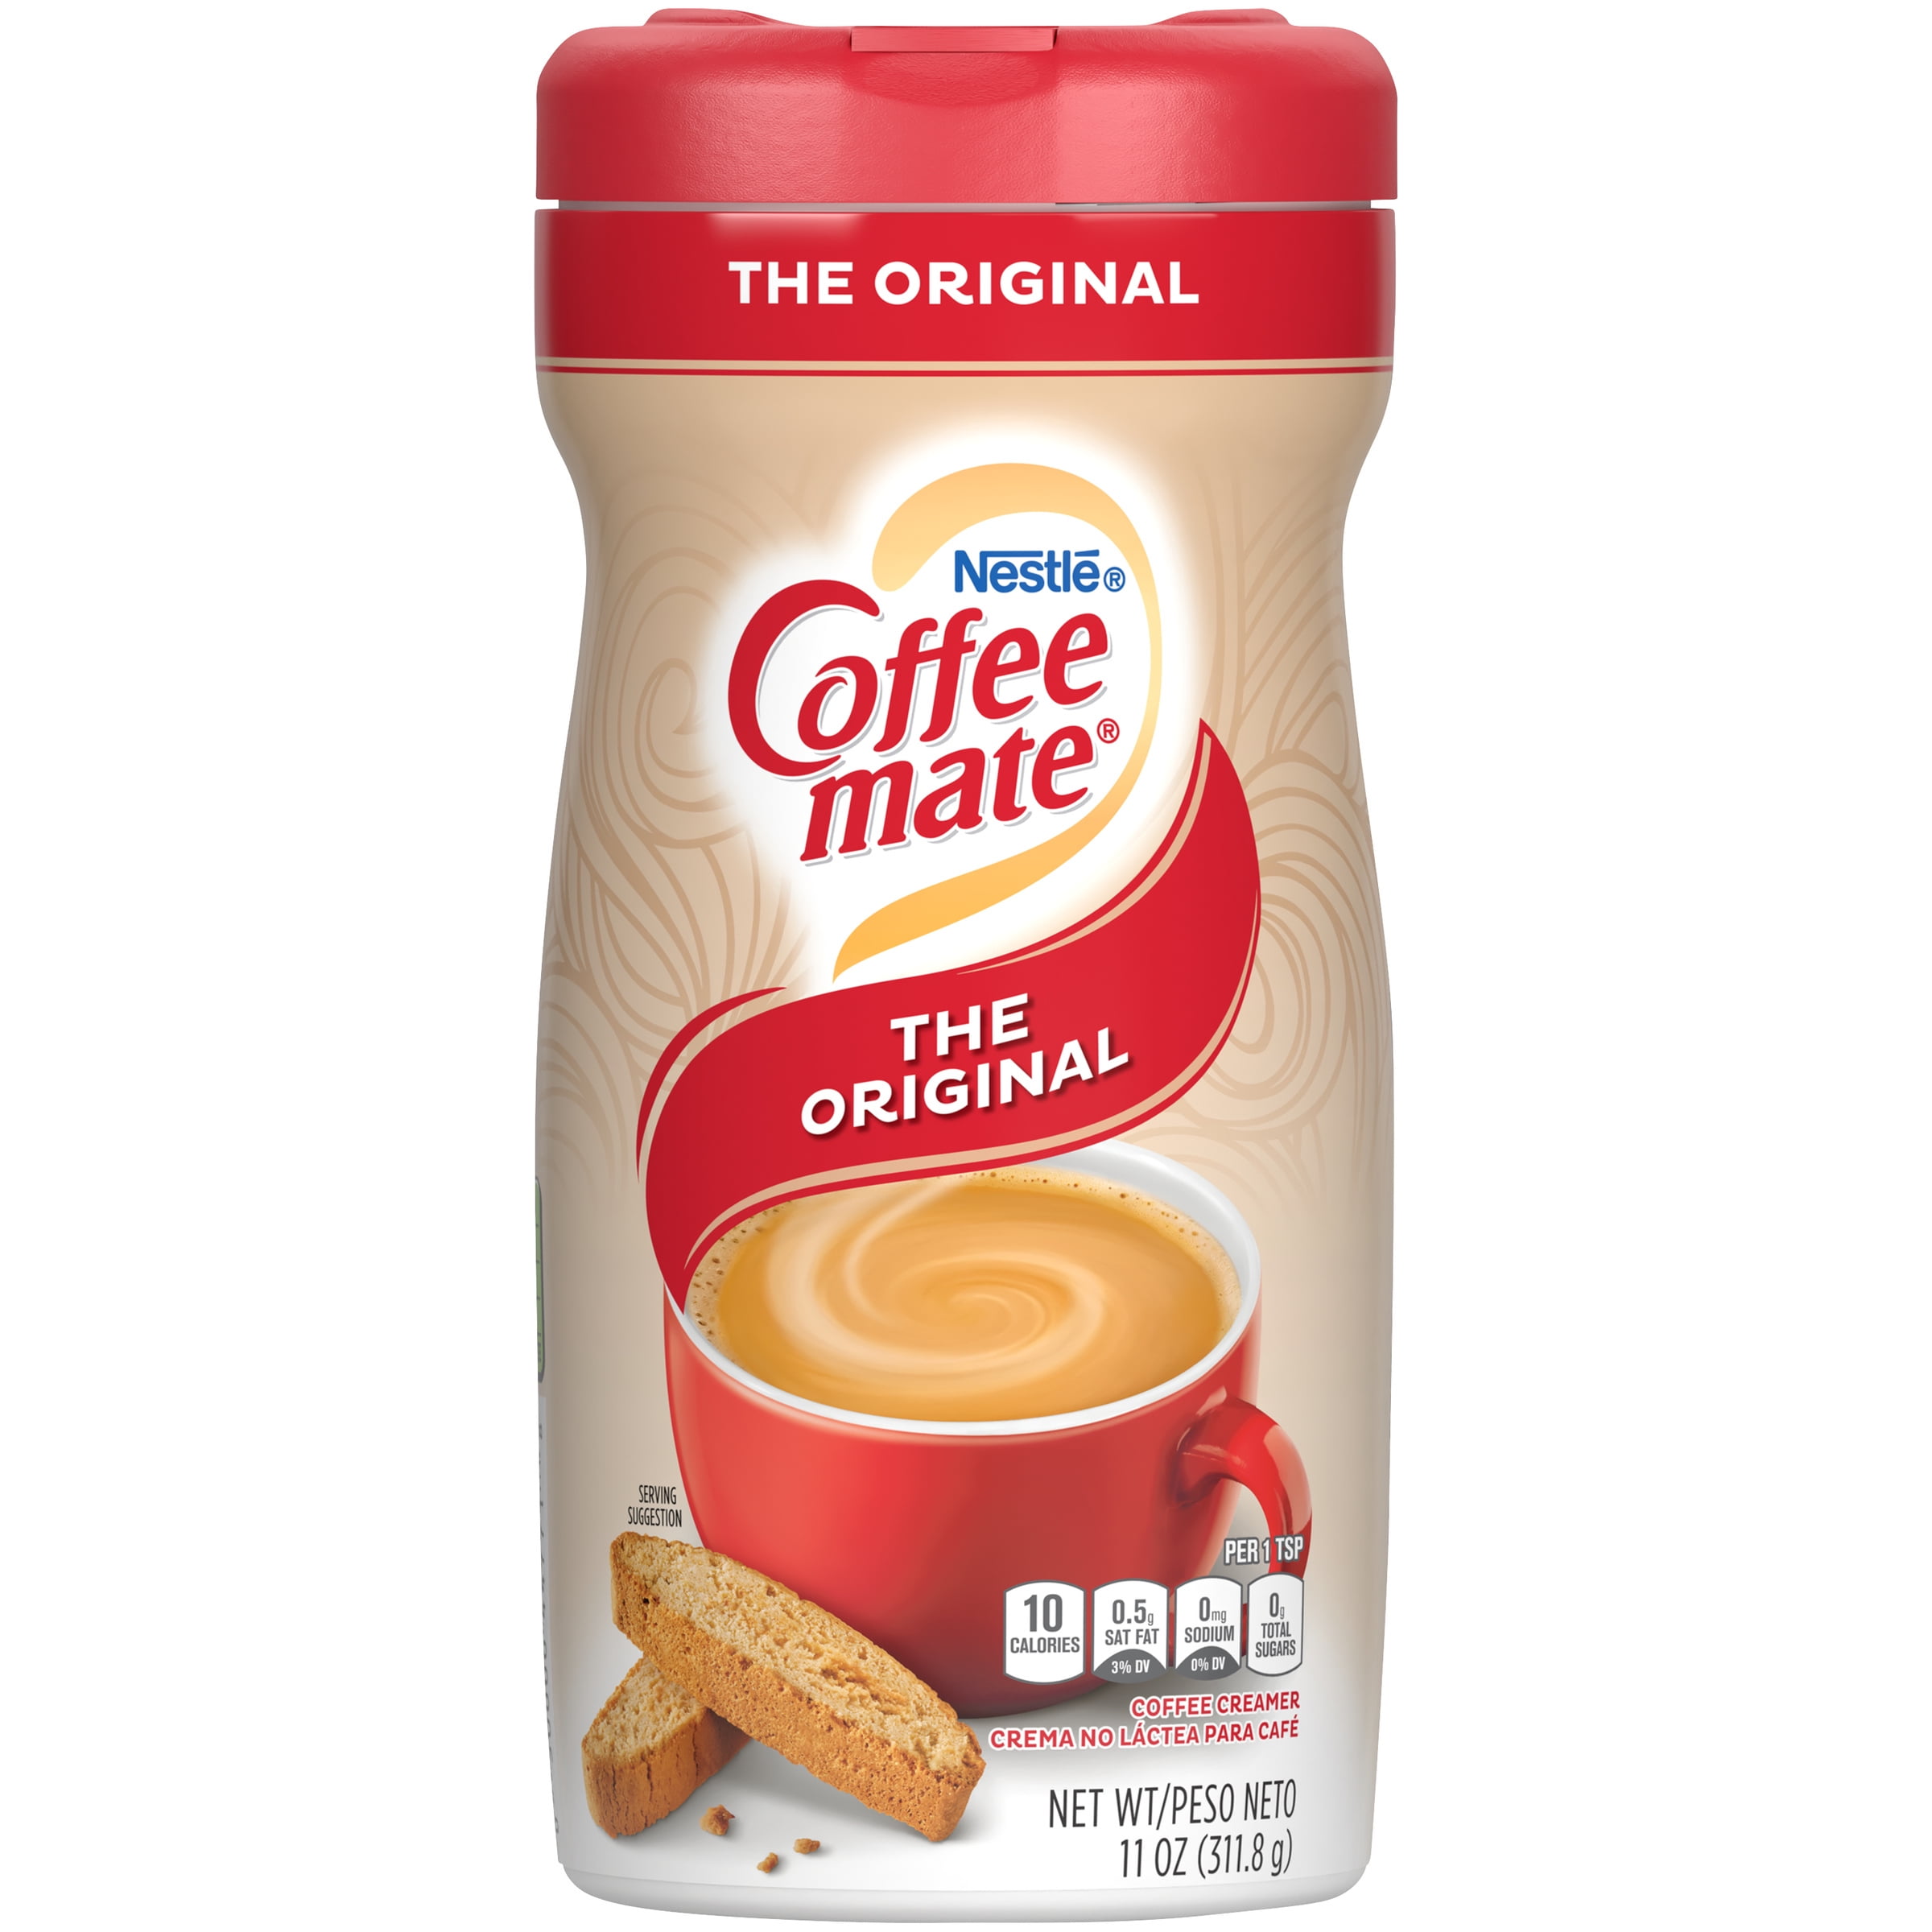 Details about   Coffee mate The Original Powdered Coffee Creamer 56 oz. Pack of 2 